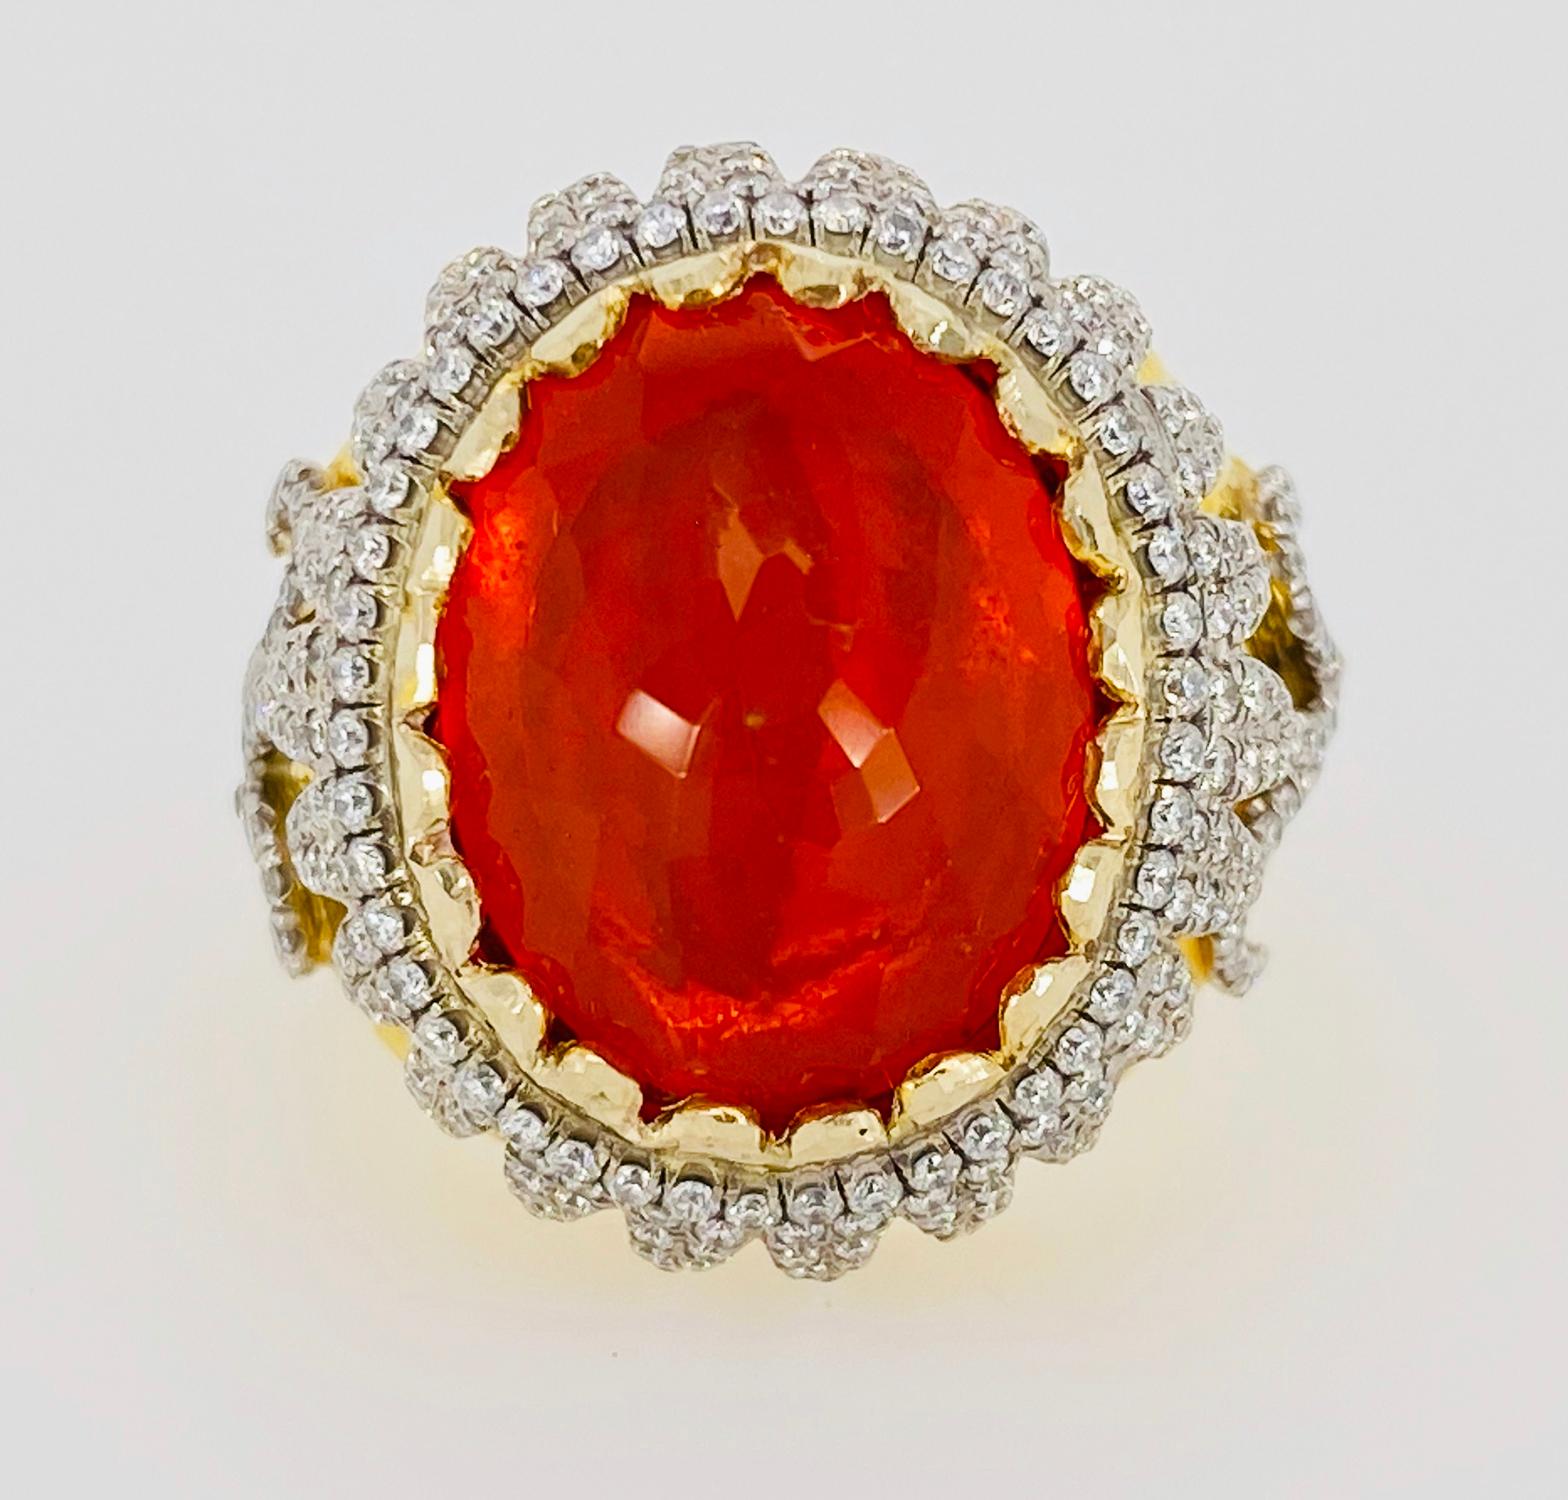 Brilliant Cut Victor Velyan Fire Opal and Diamond Ring